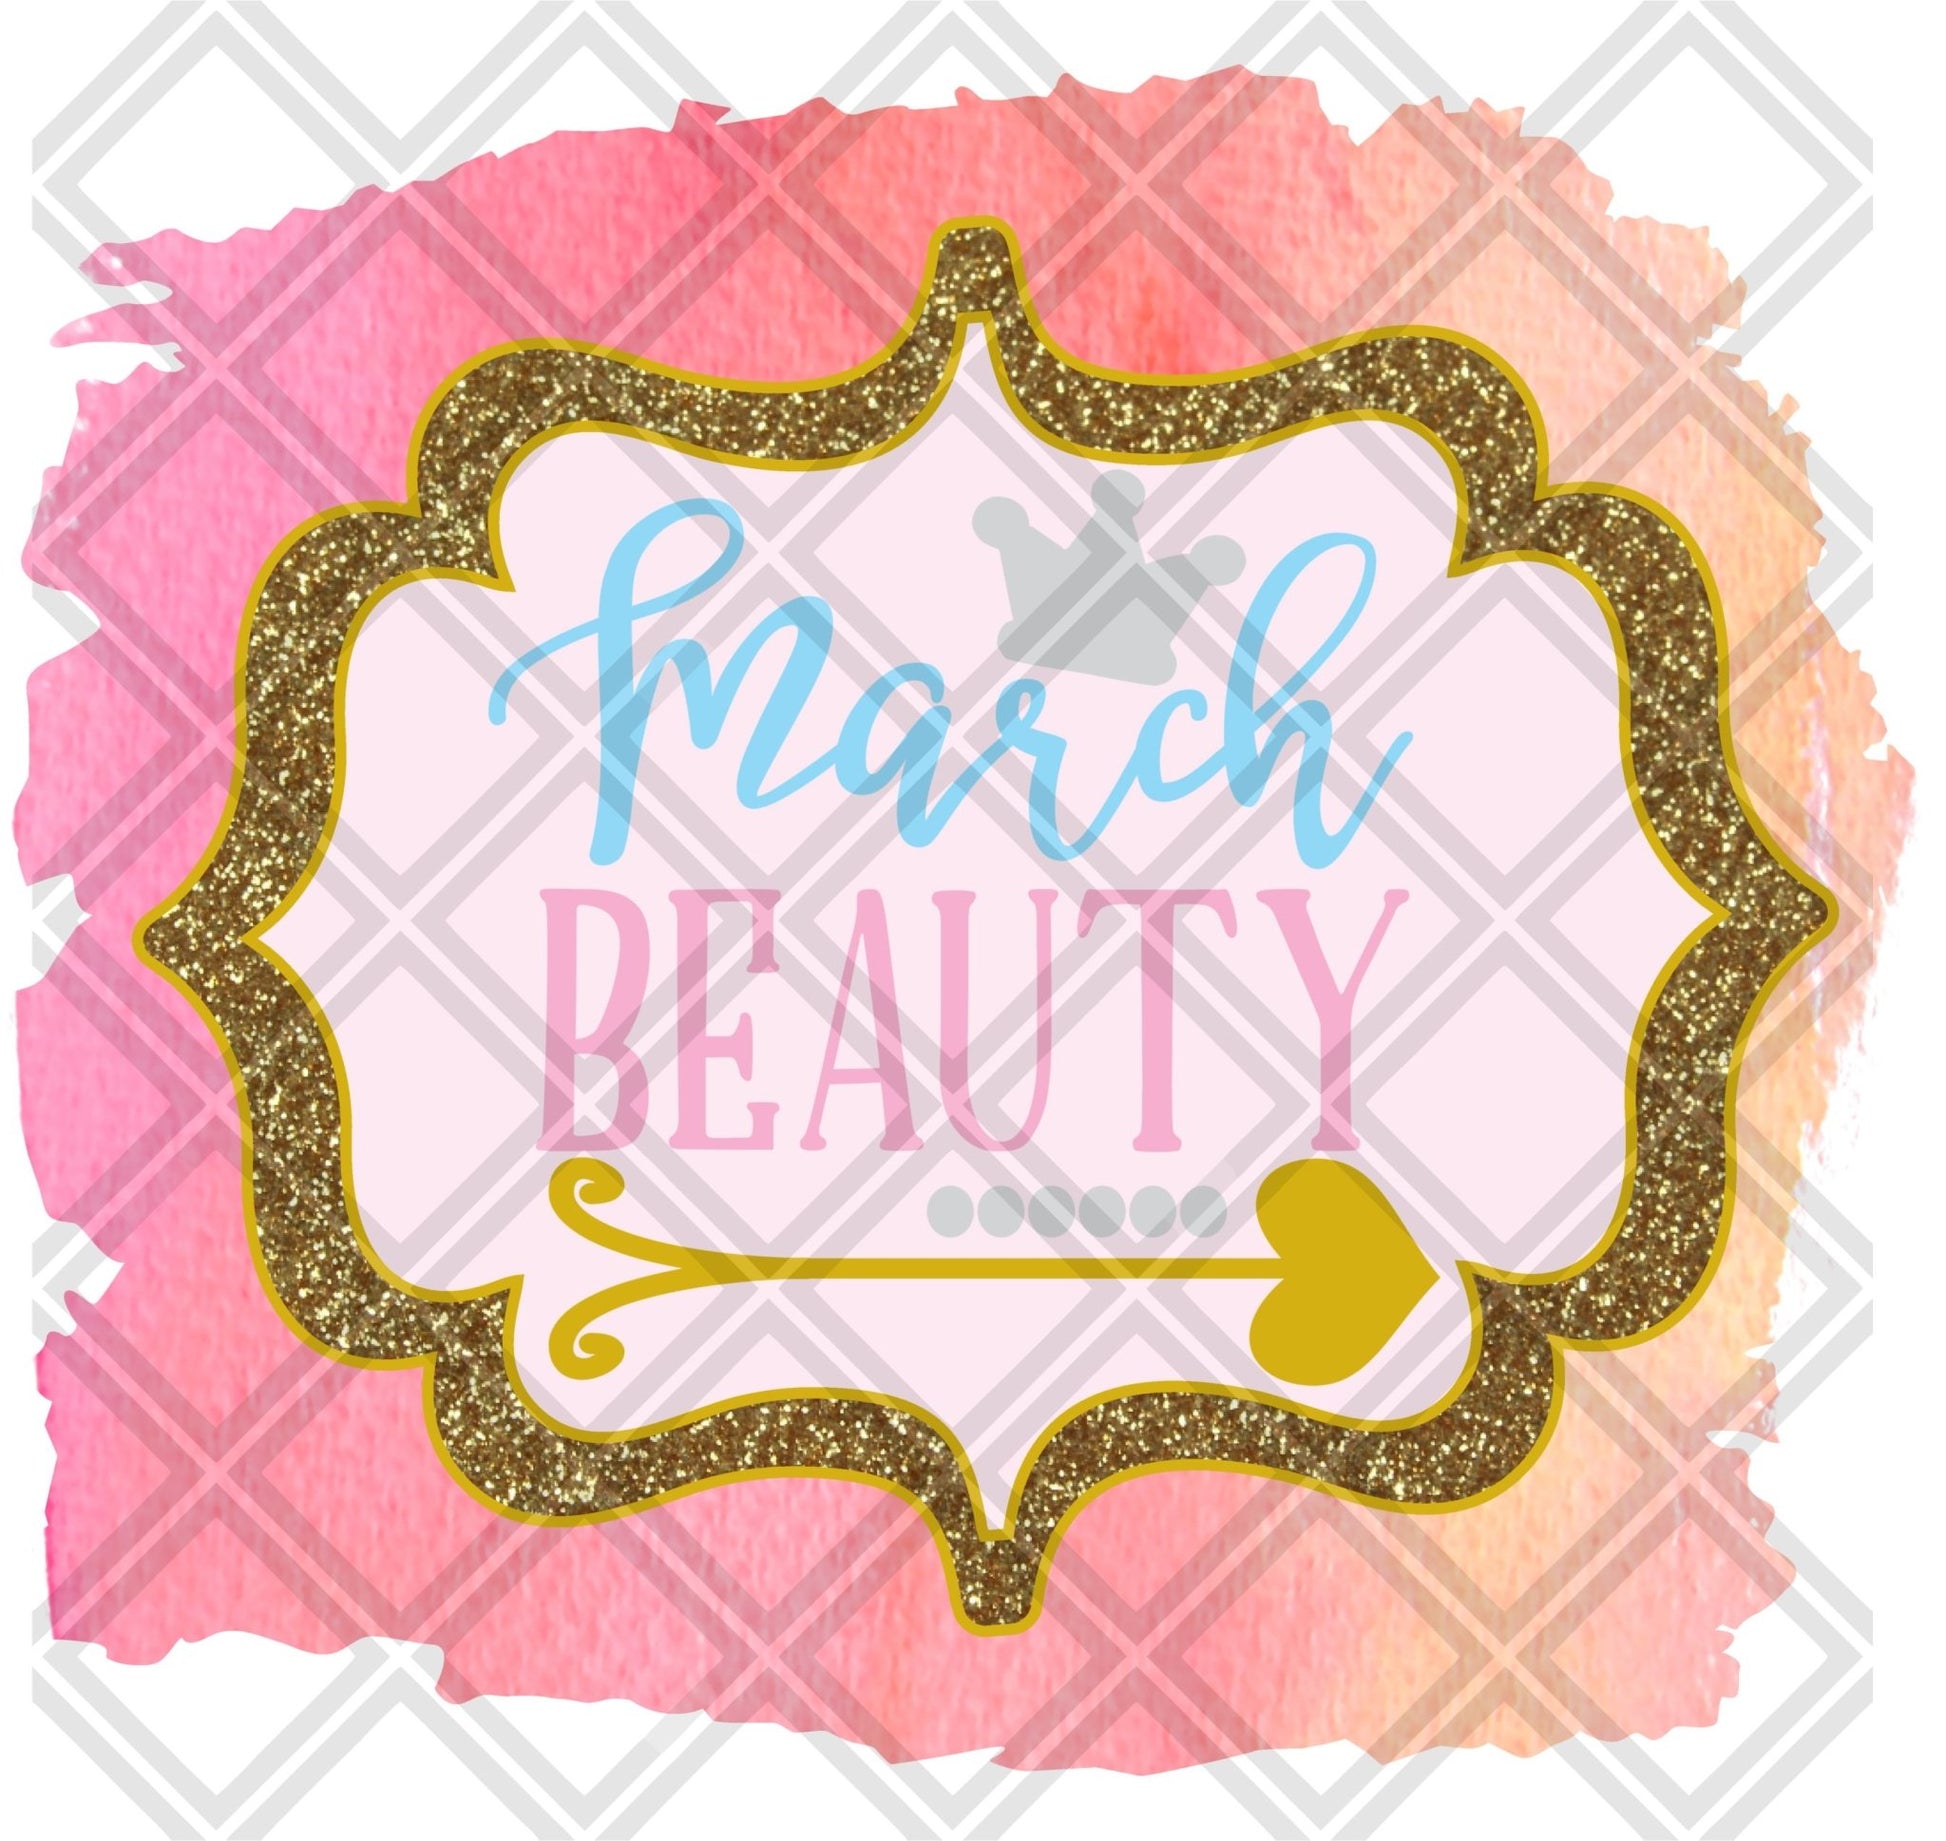 MARCH BEAUTY MONTH png Digital Download Instand Download - Do it yourself Transfers